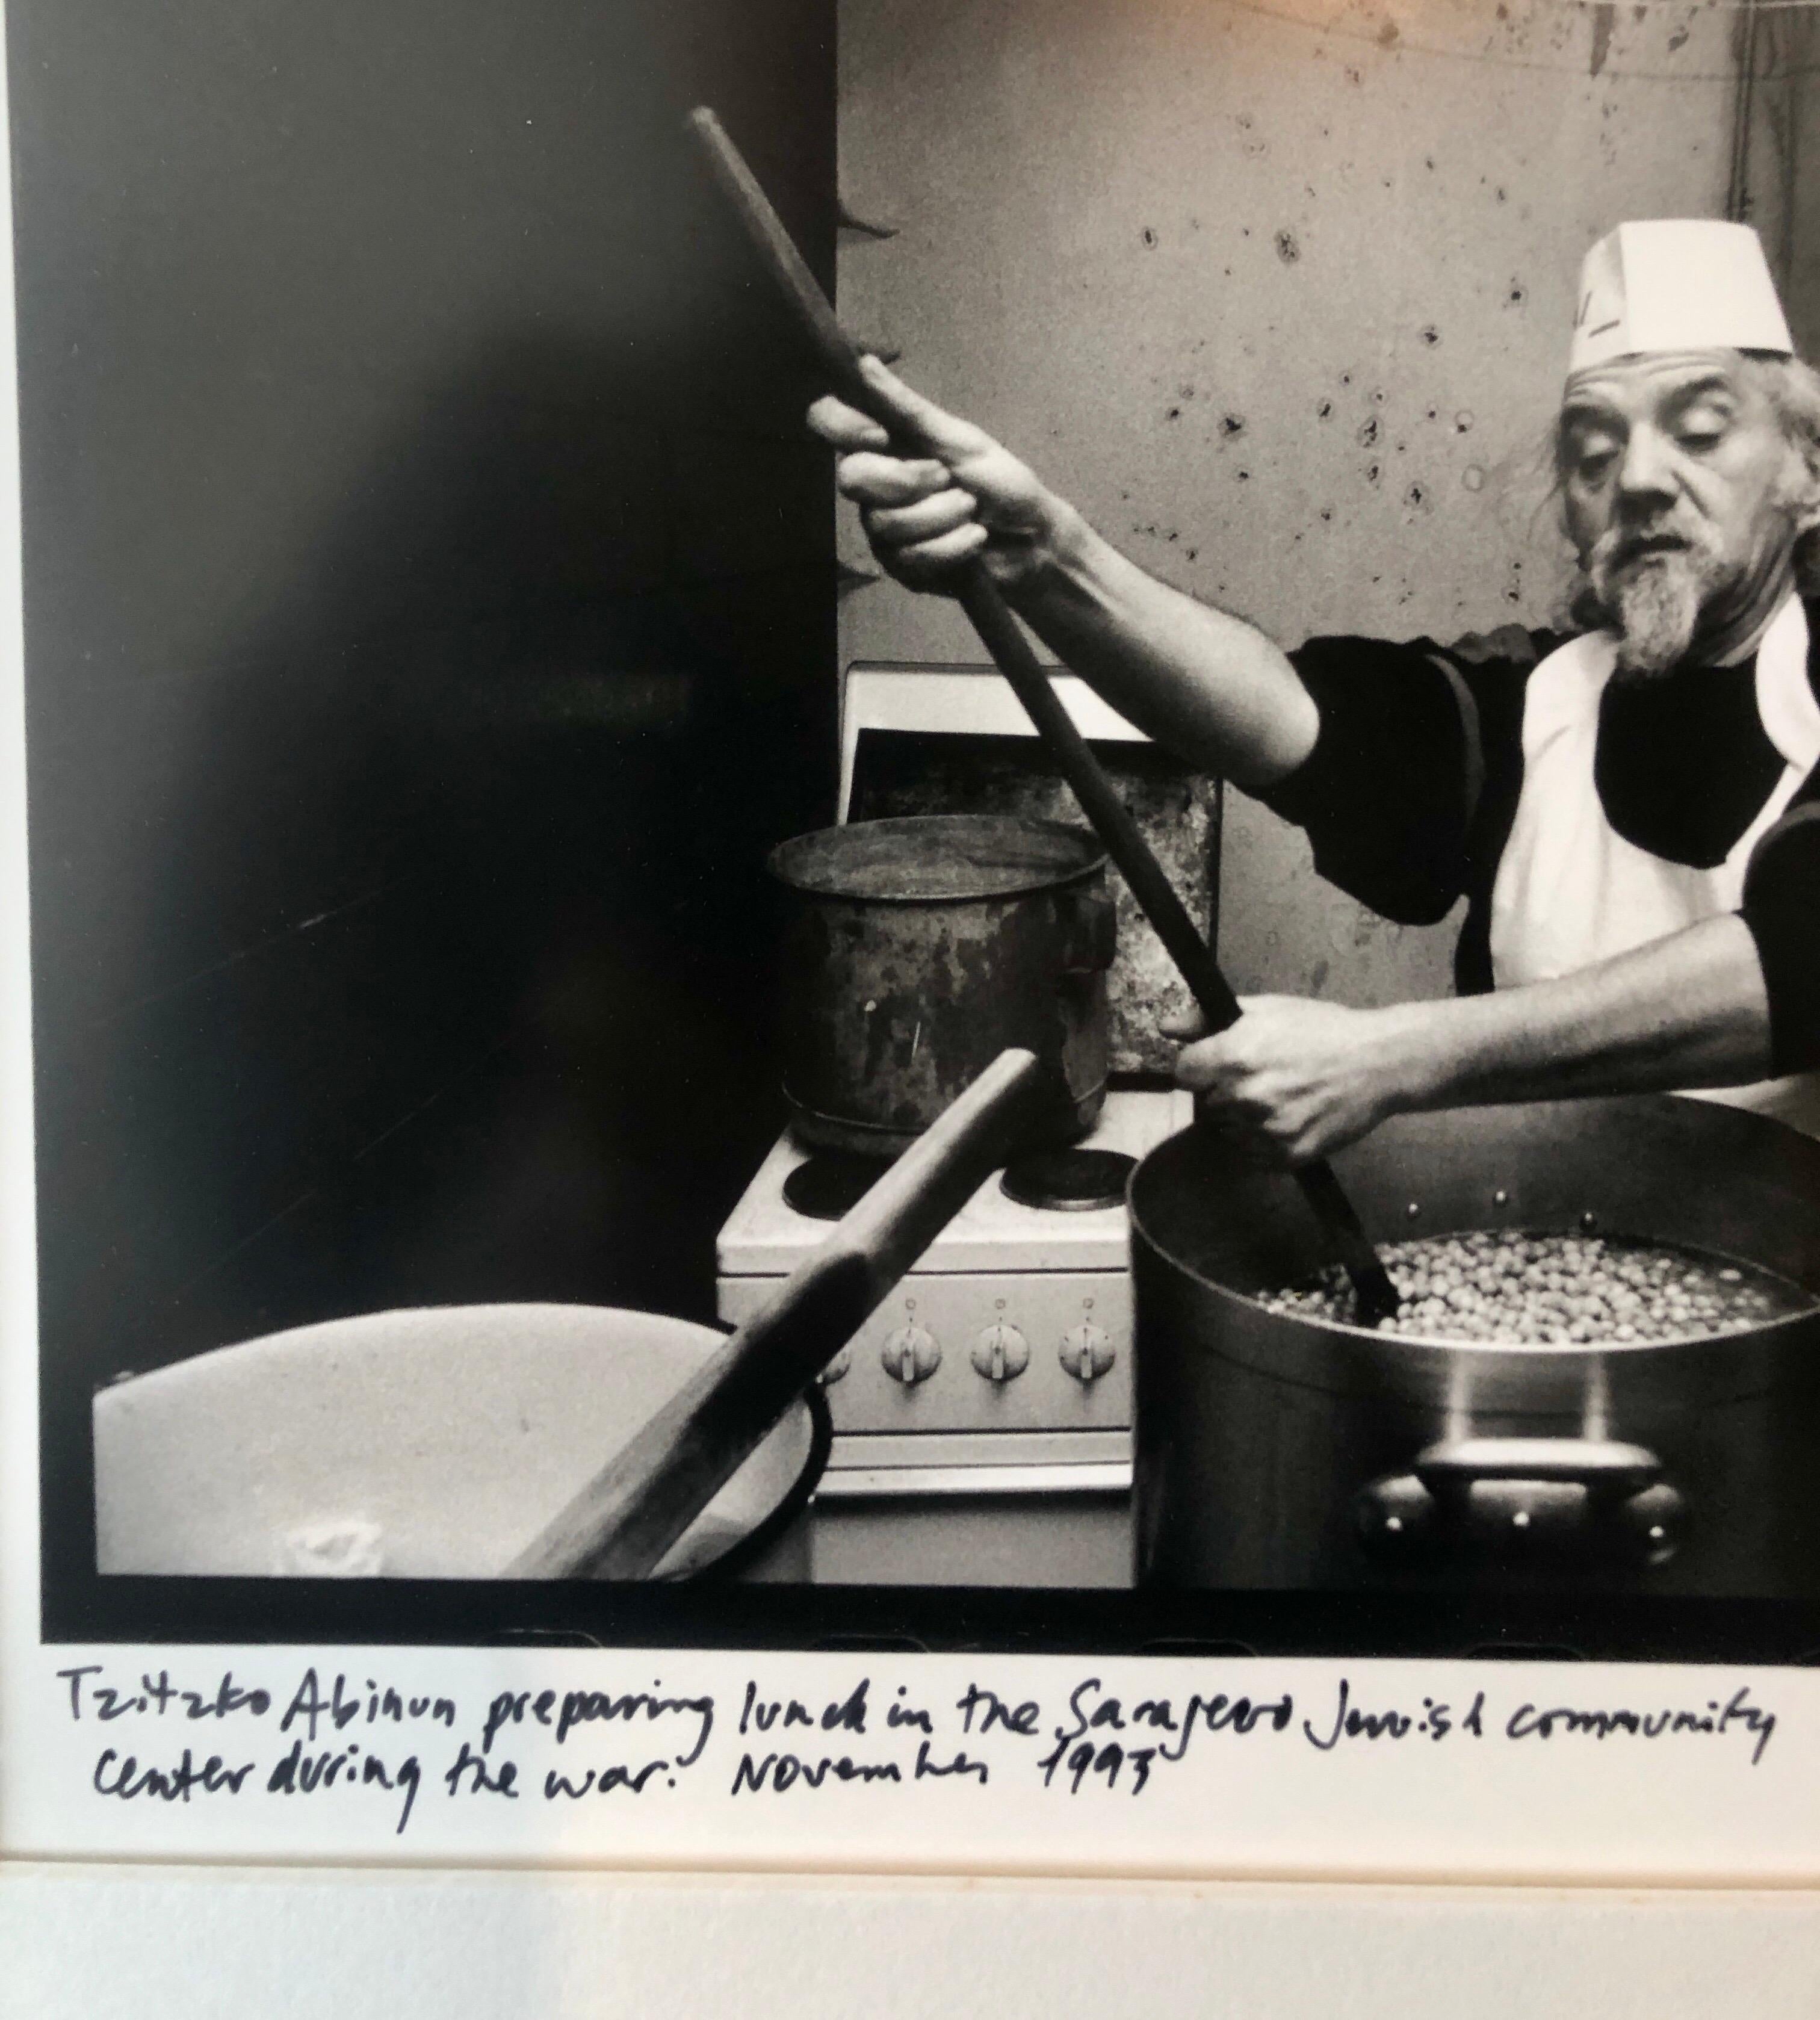 
Edward Serotta
Tzitzko Abinun (Man cooking) . Judaica. 	
 silver gelatin print, matted, captioned by hand and hand signed and numbered. B/W photographs documenting Jewish life in Eastern and Central Europe. 
Edward Serotta is a journalist,